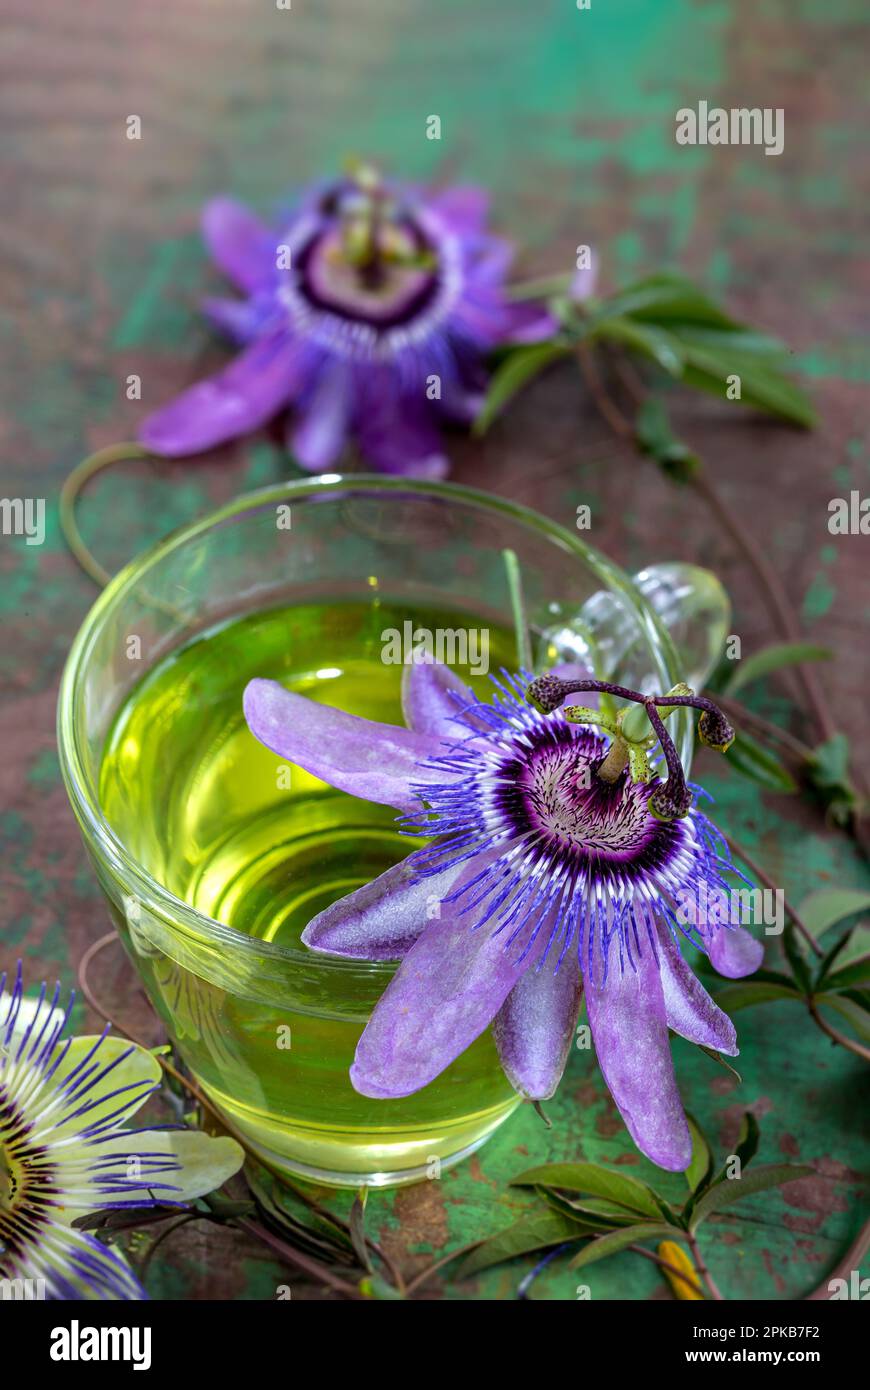 Passionflower herbal tea (Passiflora caerulea) in a glass cup on old board. Stock Photo